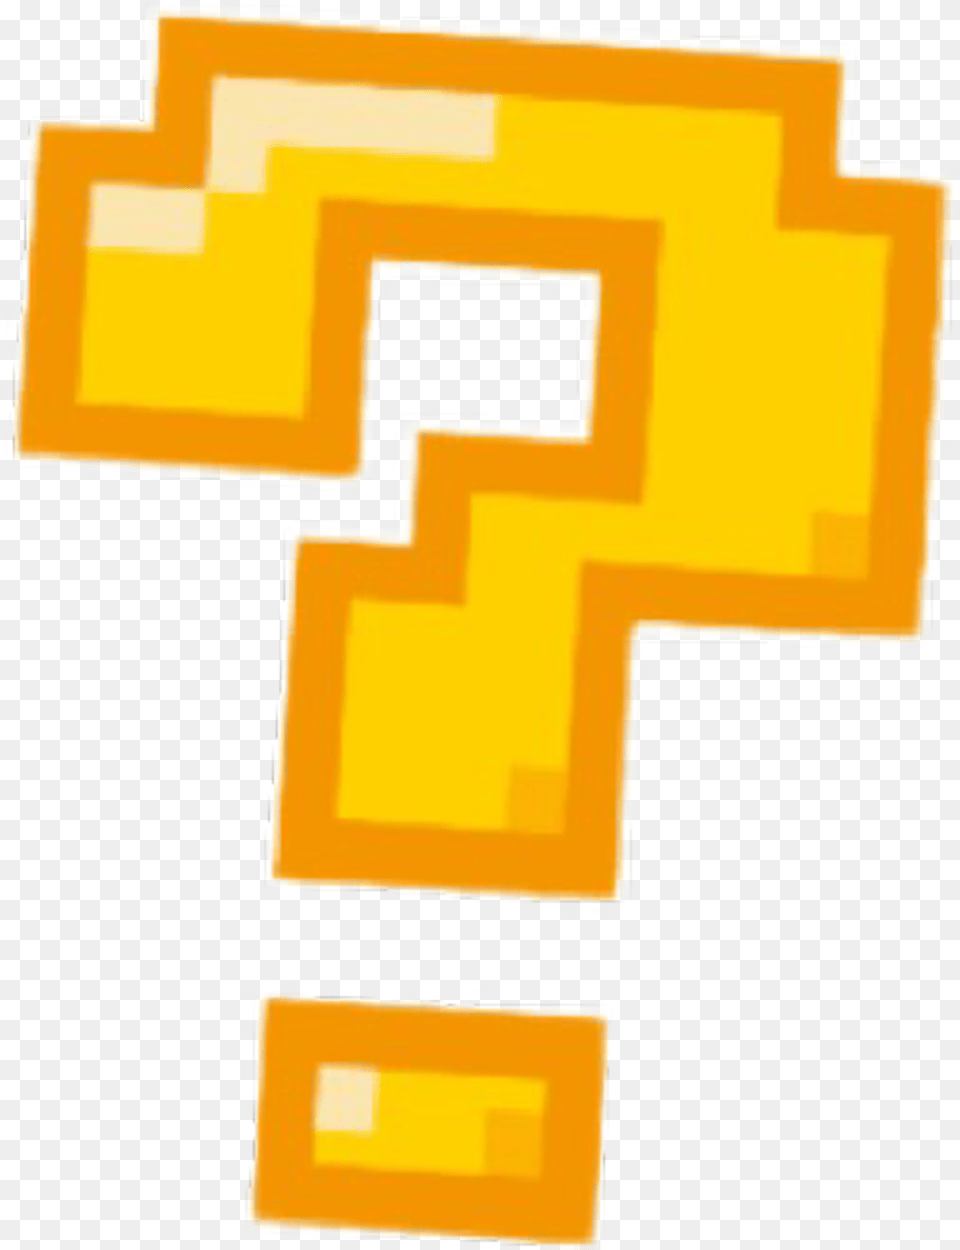 Yellow Sign Punctuation Pixel Questionmark Freetoedit Pixel Question Mark Free Transparent Png